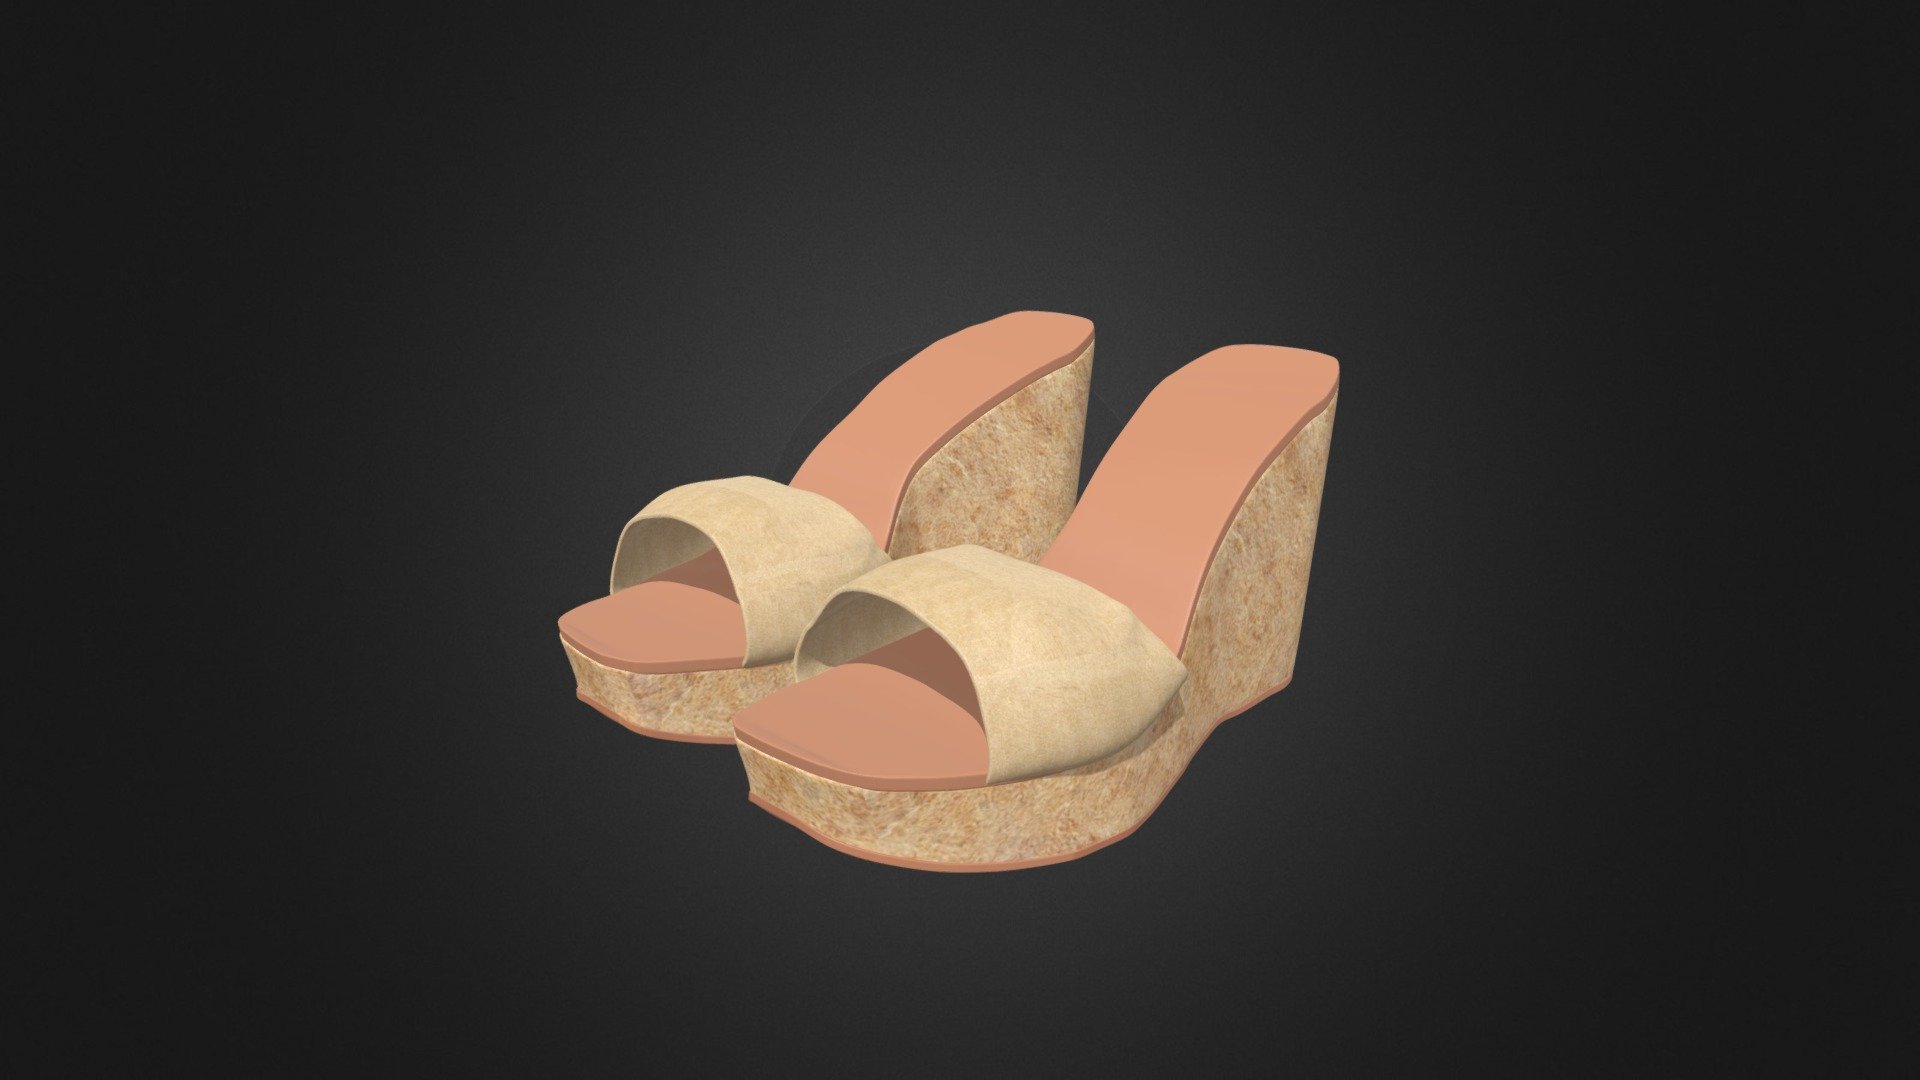 Use sama file with White leather wedge slipper, but change the texture ( material) for this Wood wedge shoes .
Hope you like 3d model